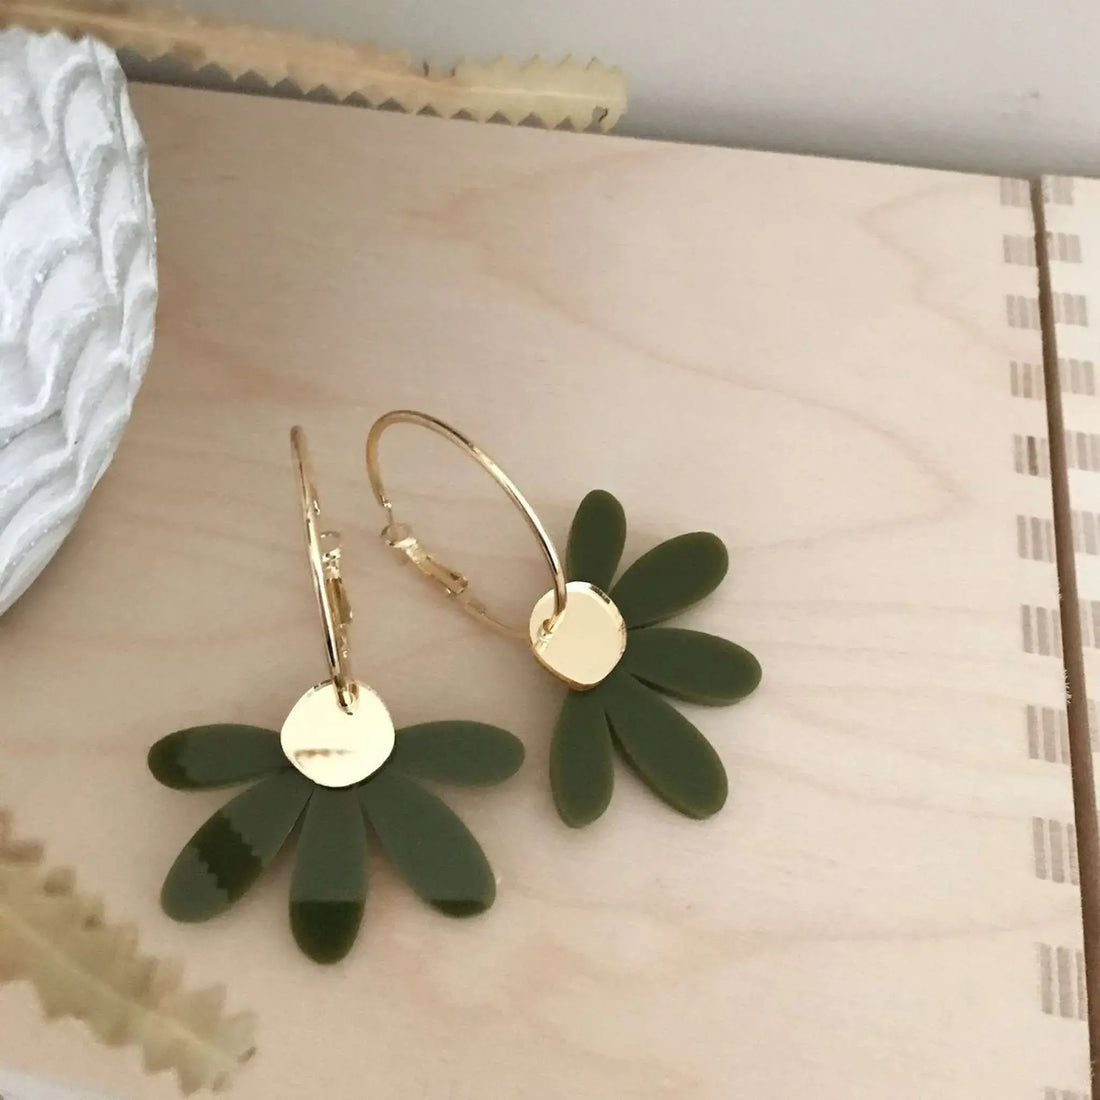 Jumbo Daisy Hoop Earrings in Olive &amp; Gold by Foxie Collective